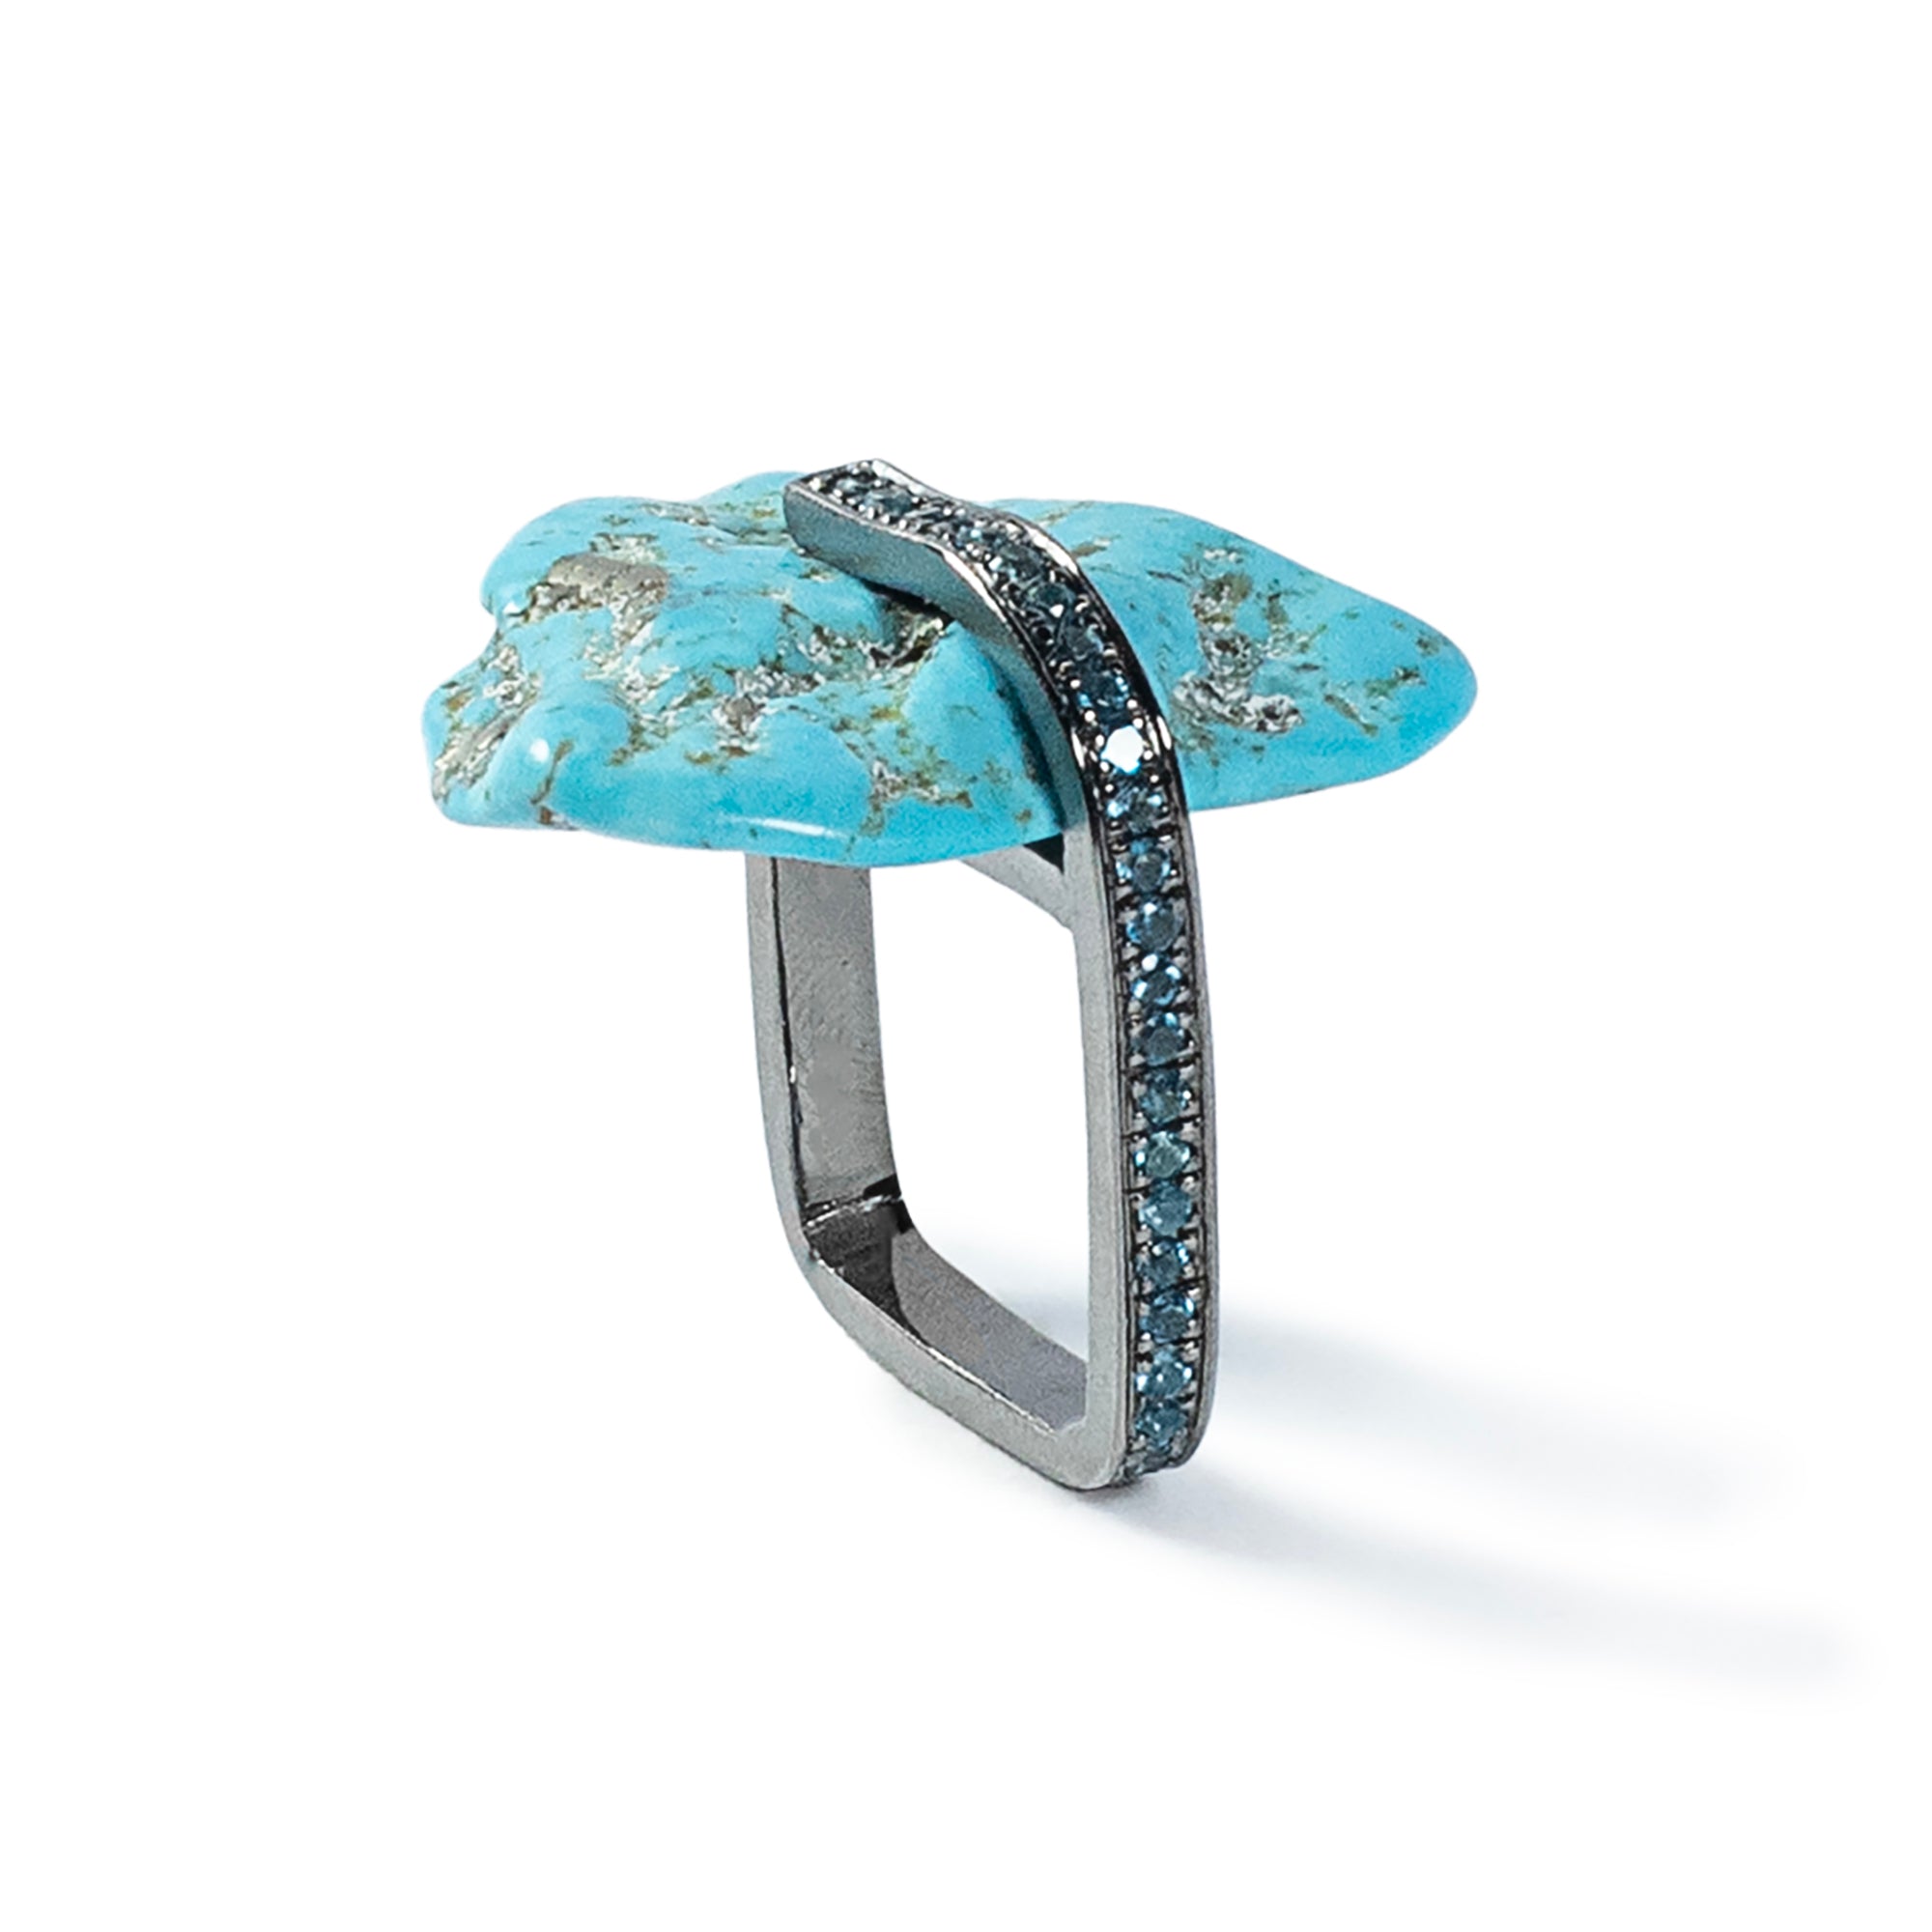 Lafu Rough Turquoise and Topaz Ring